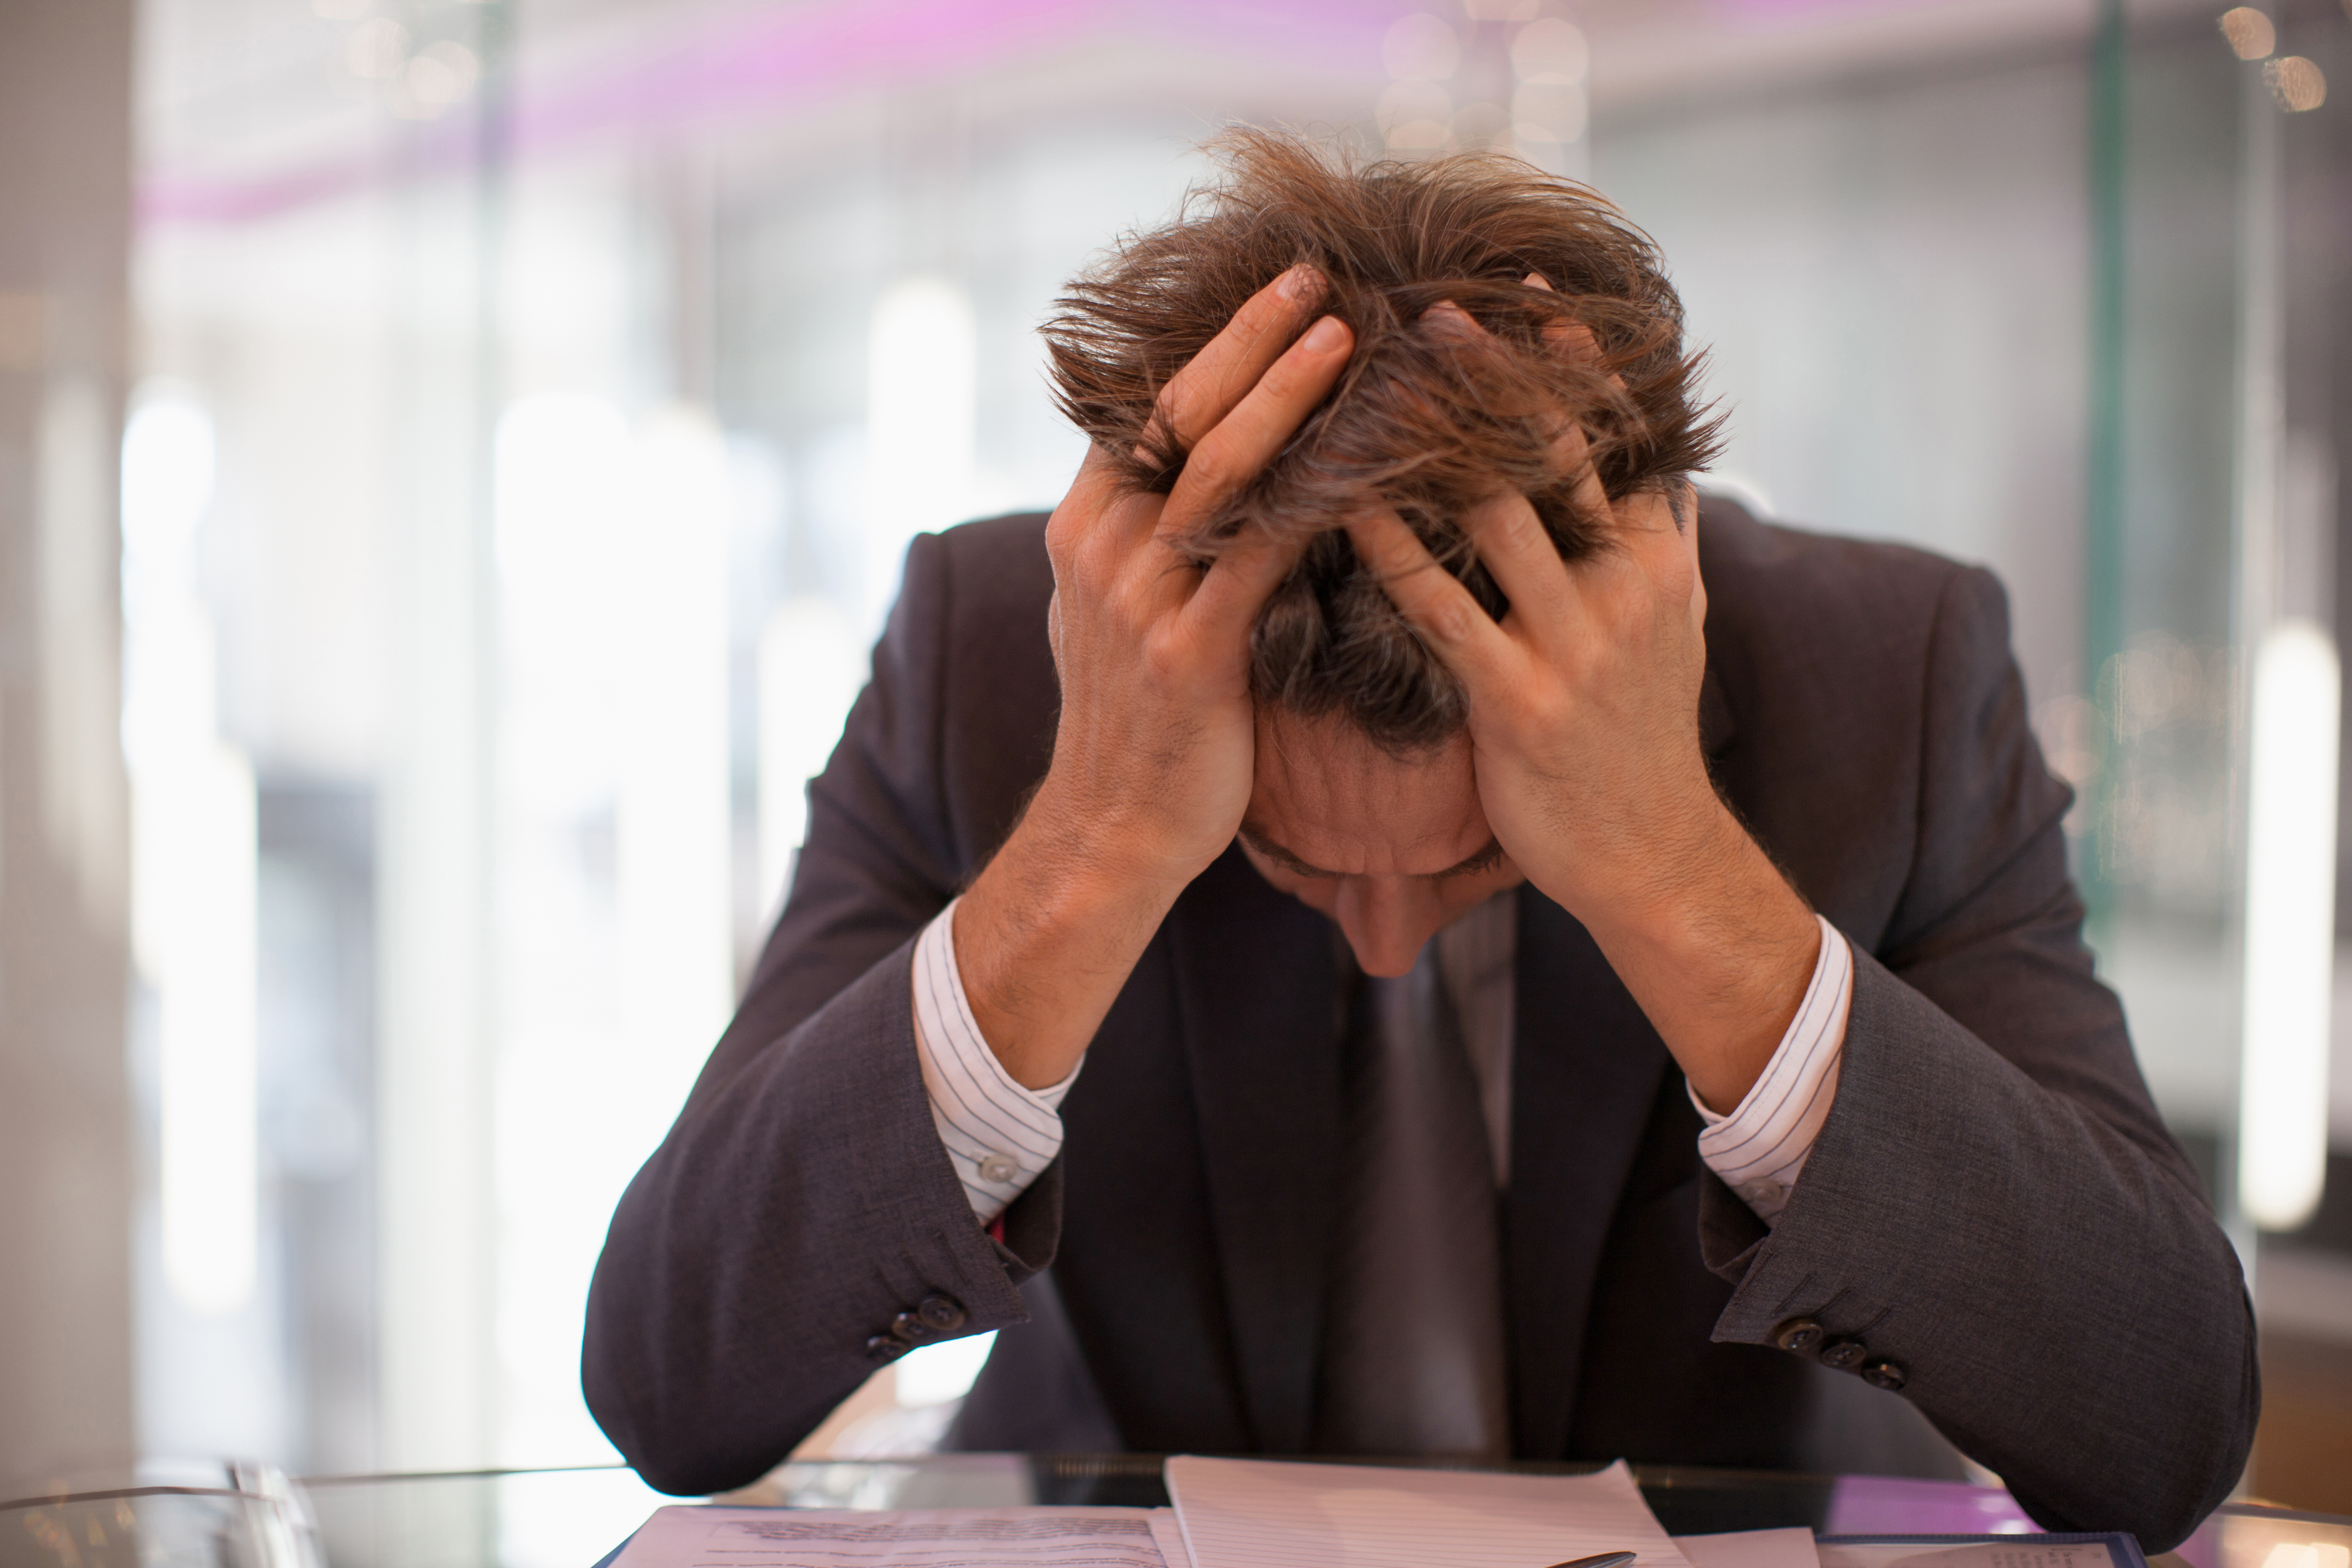 Frustrated businessman sitting at desk with head in hands | Source: Getty Images